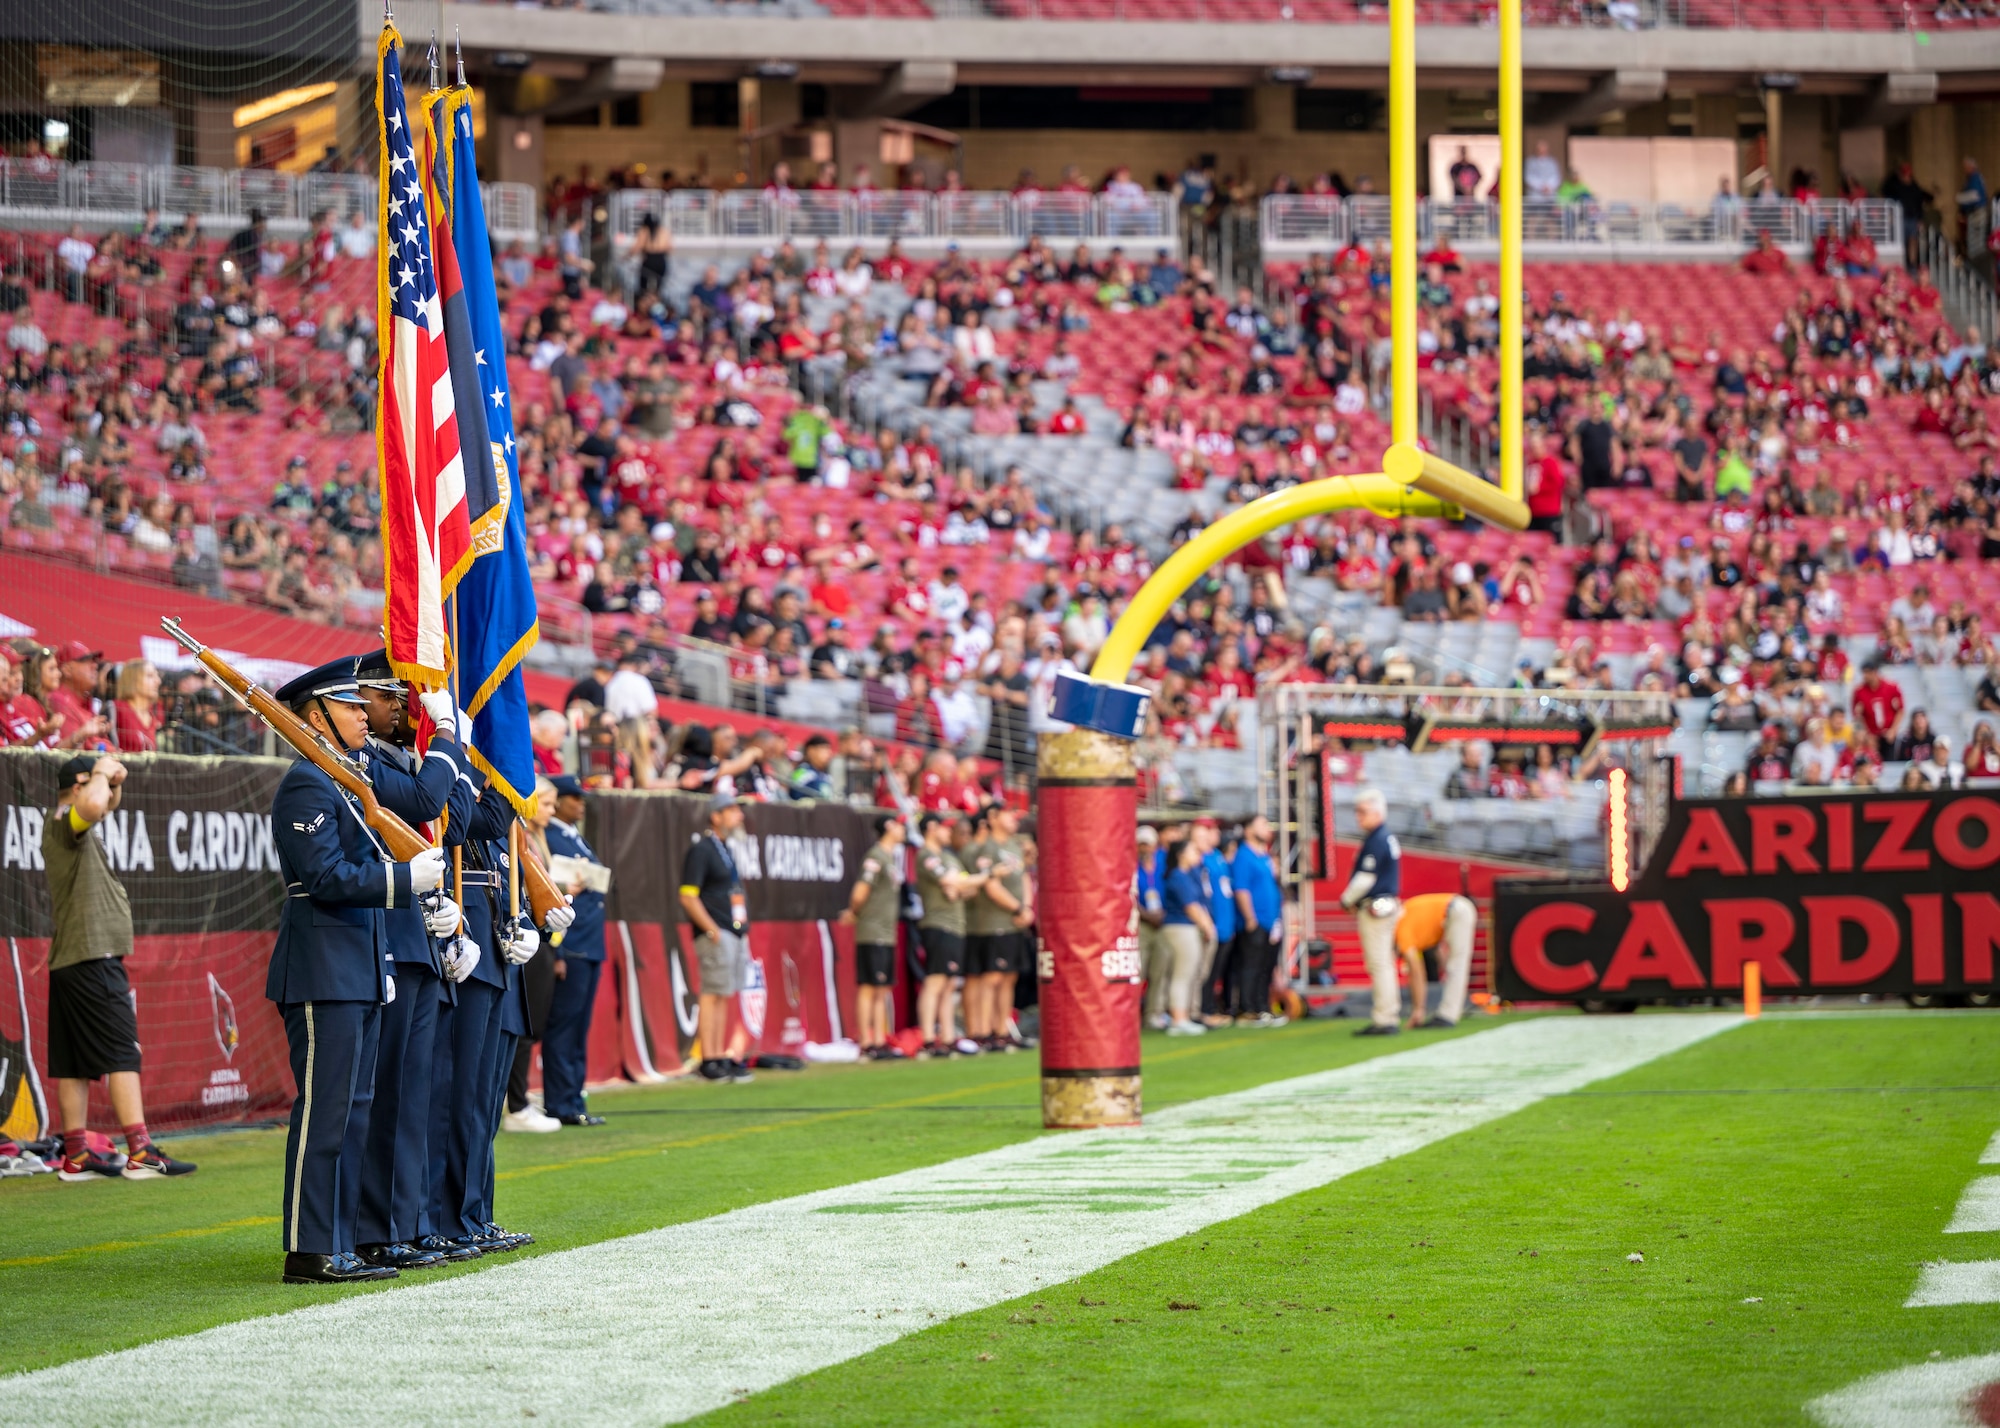 U.S. Air Force Honor Guardsmen assigned to the 56th Fighter Wing, Luke Air Force Base, stand at attention before the Arizona Cardinals Salute to Service event Nov. 6, 2022, at State Farm Stadium, Glendale, Arizona.